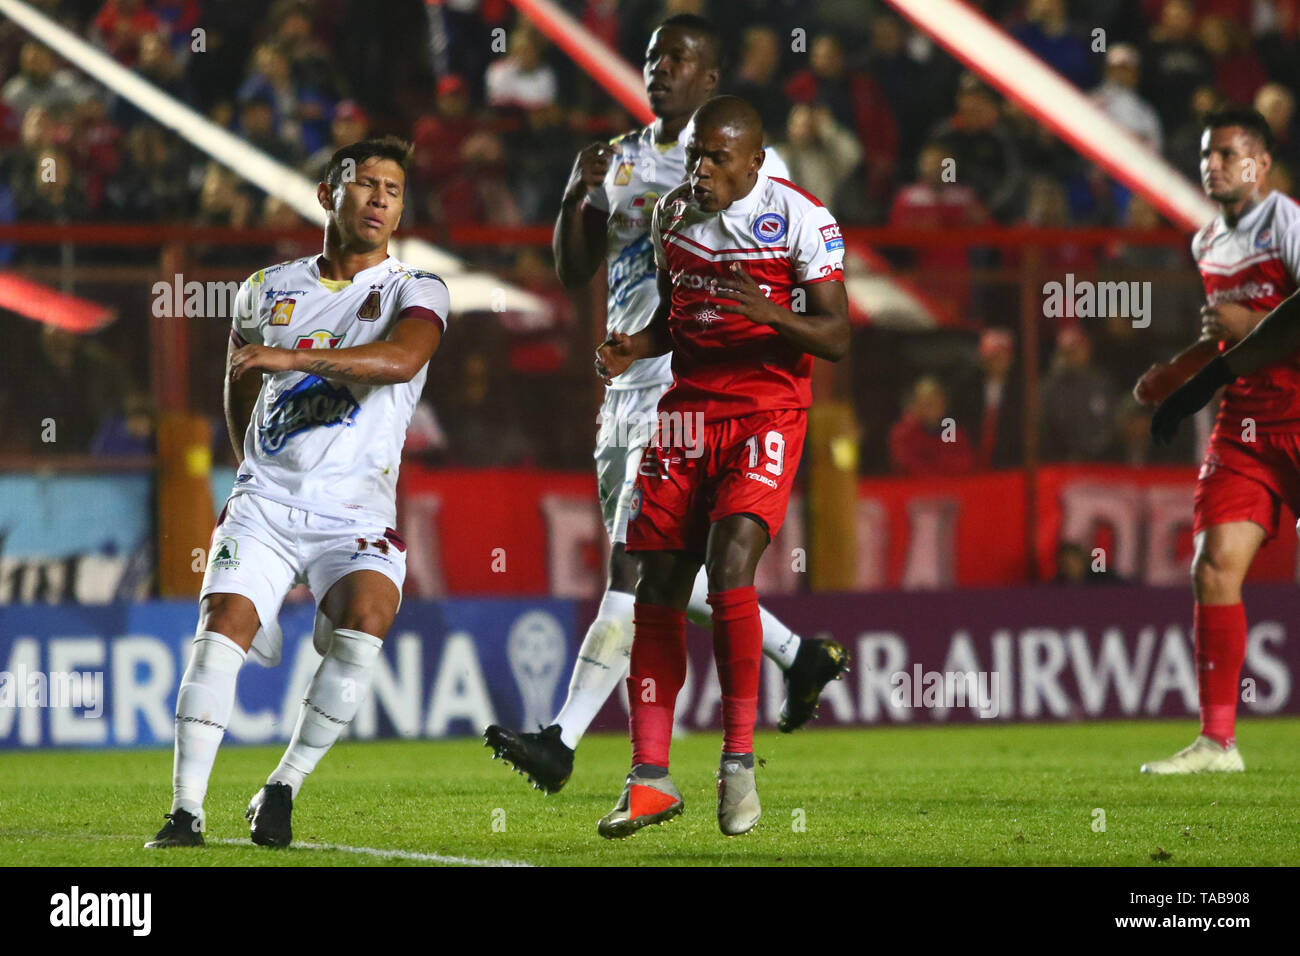 BUENOS AIRES, 23.05.2019: Leandro Paiva during the match between Argentinos Juniors and Deportes Tolima for the 2nd round of Conmebol Sudamericana Cup Stock Photo